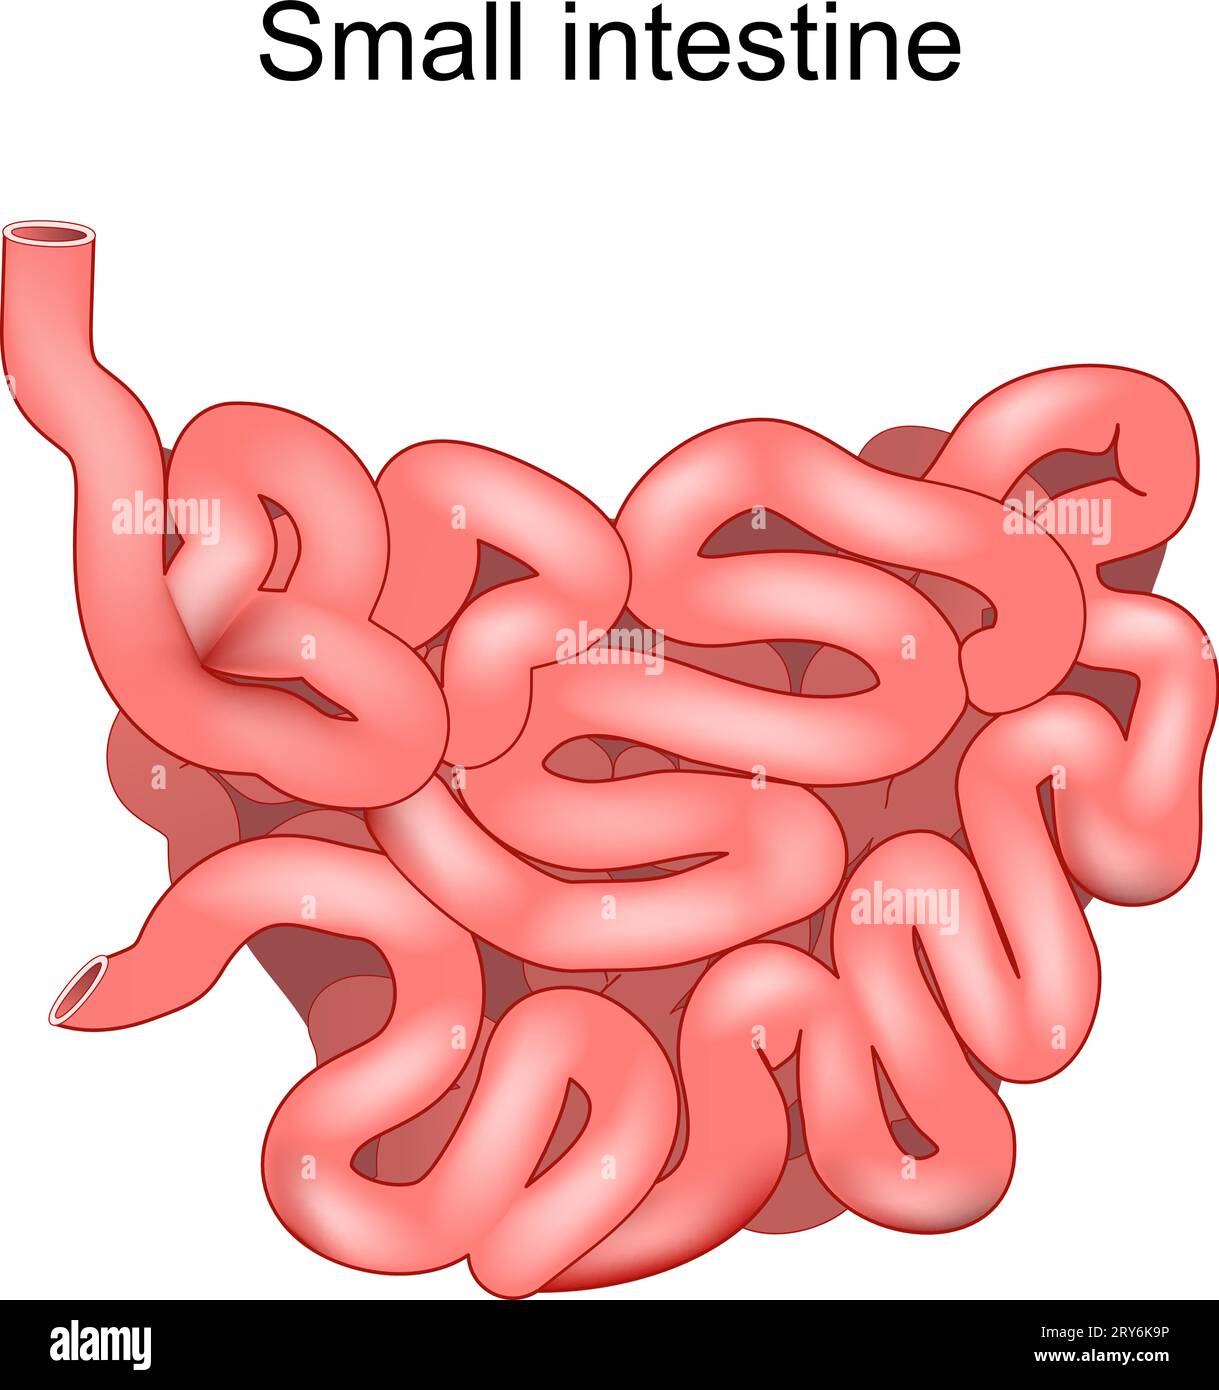 small Intestine. Medical Illustration. Human Anatomy. Small bowel is a part of a gastrointestinal tract. Digestive system. Vector illustration Stock Vector